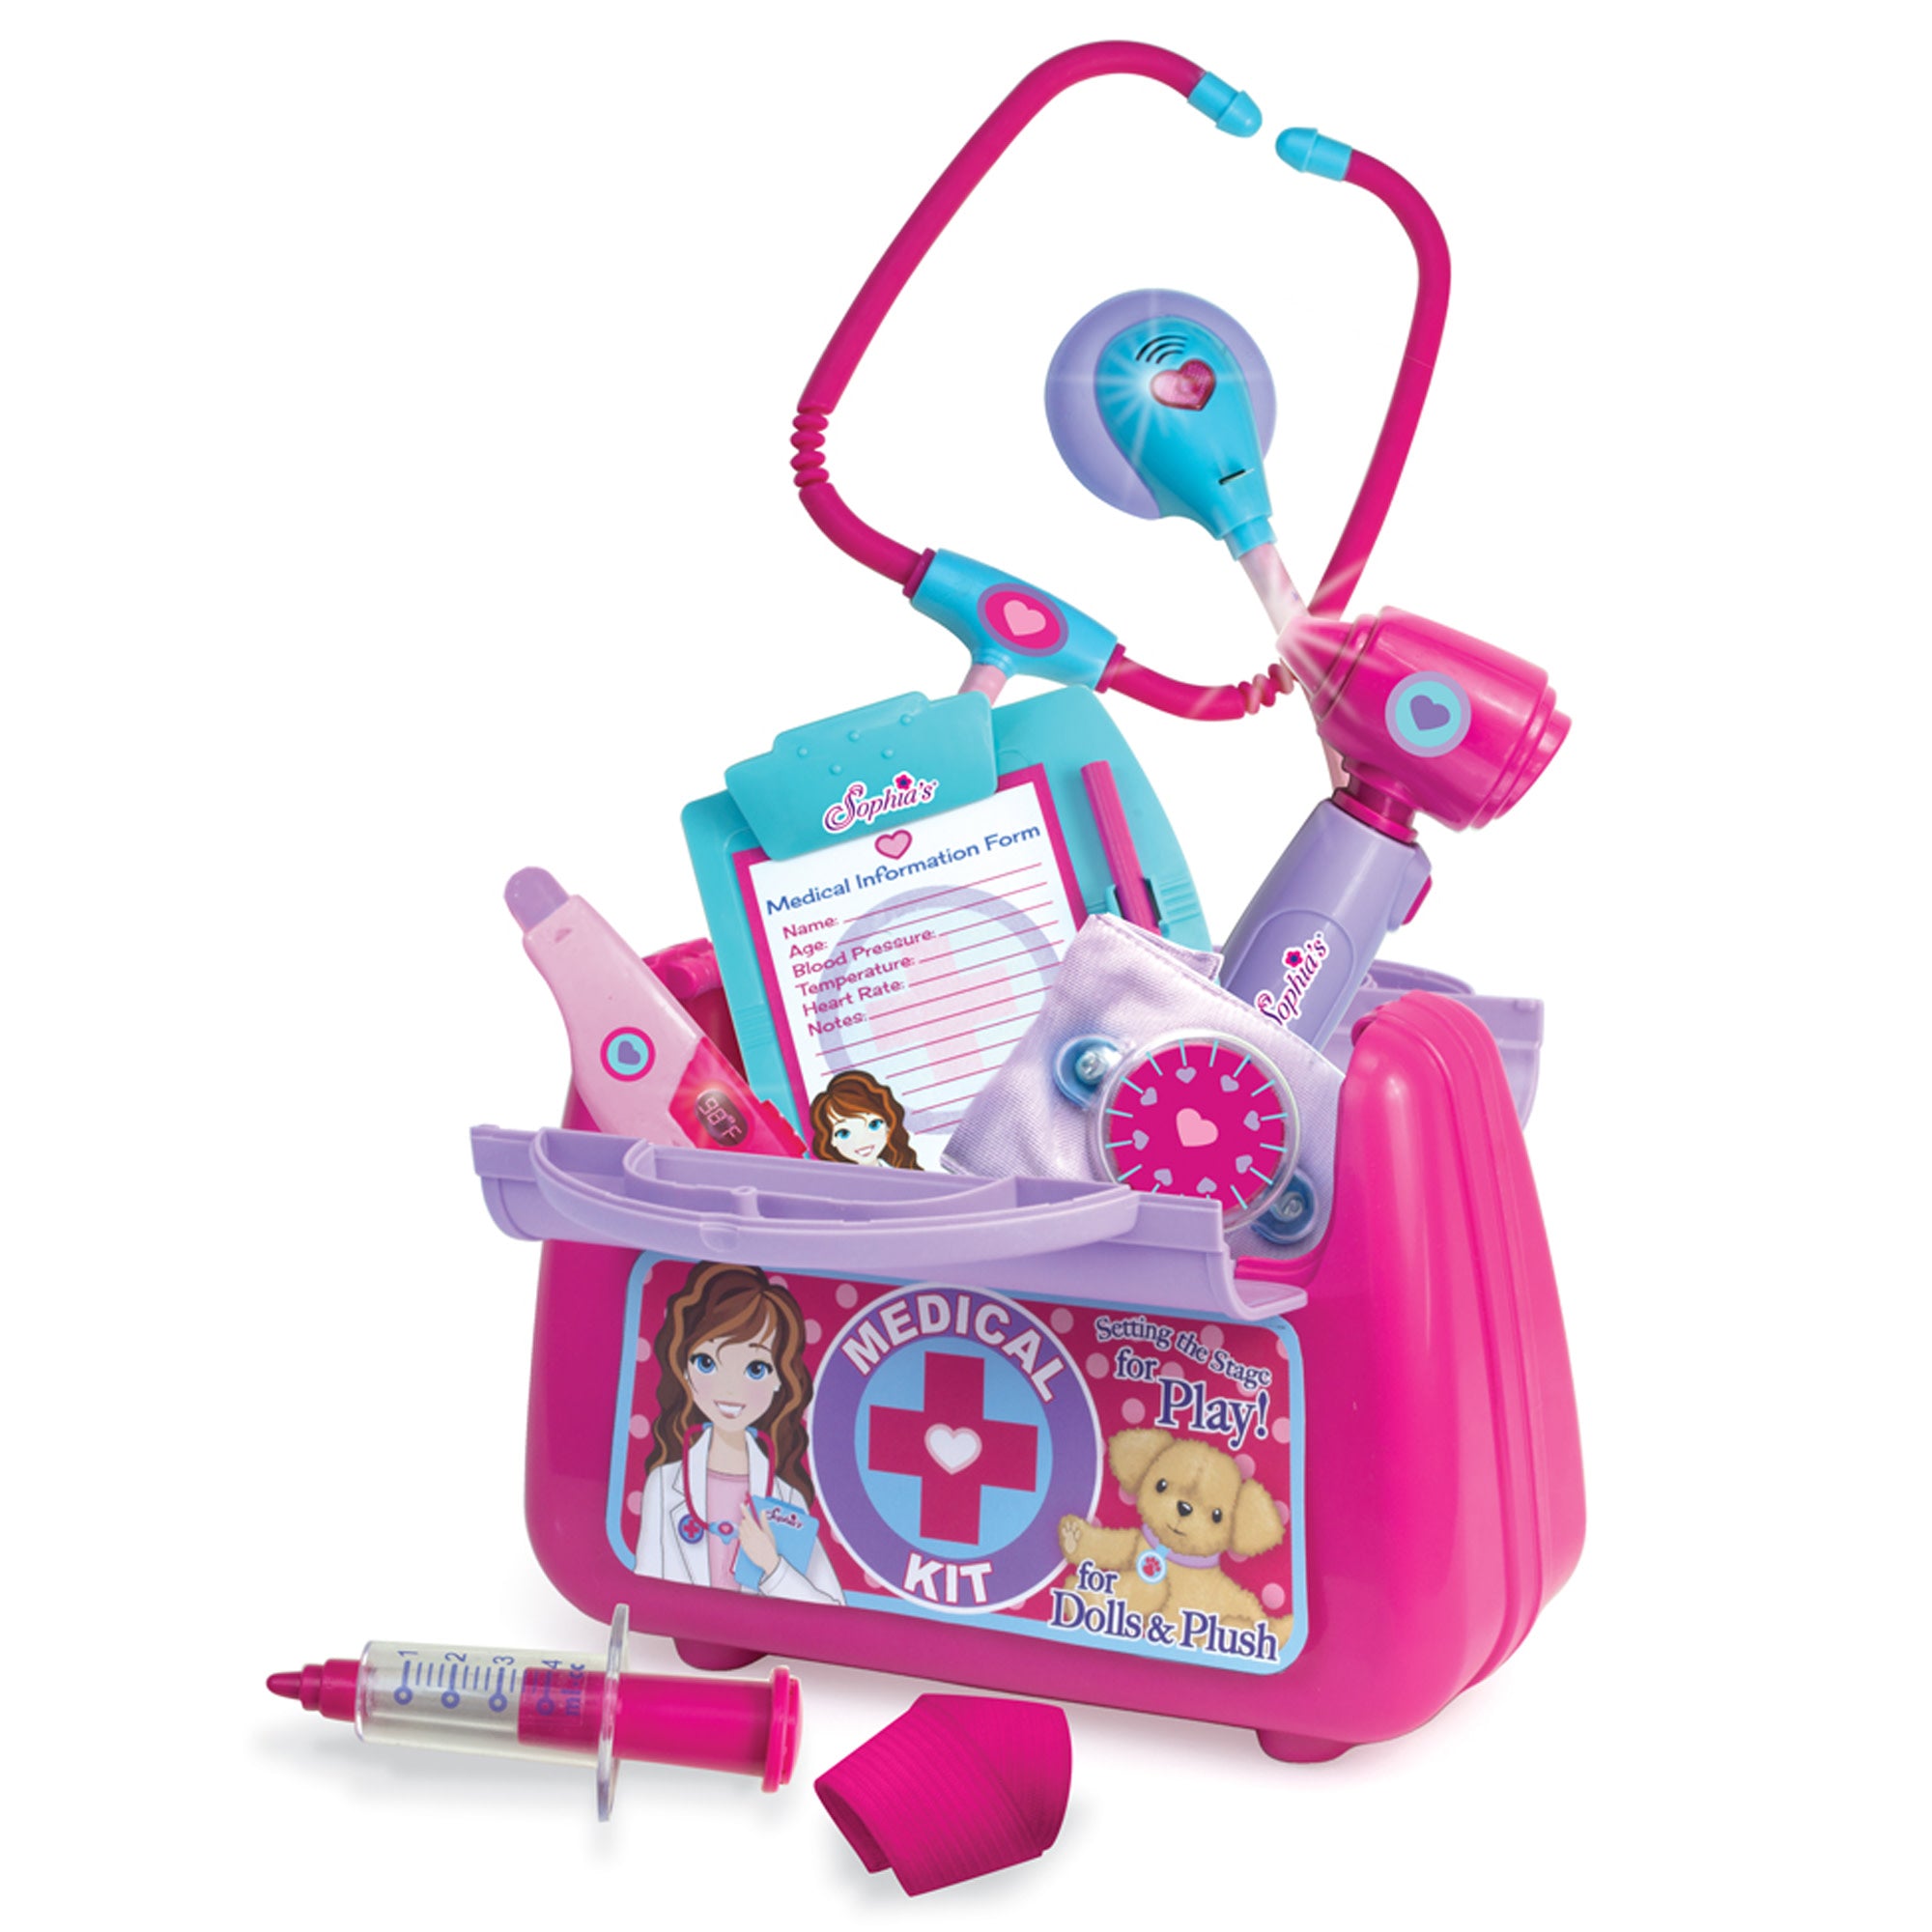 Sophia's - 18" Doll - Medical Kit for Dolls & Plush in Closed Color Box - Pink